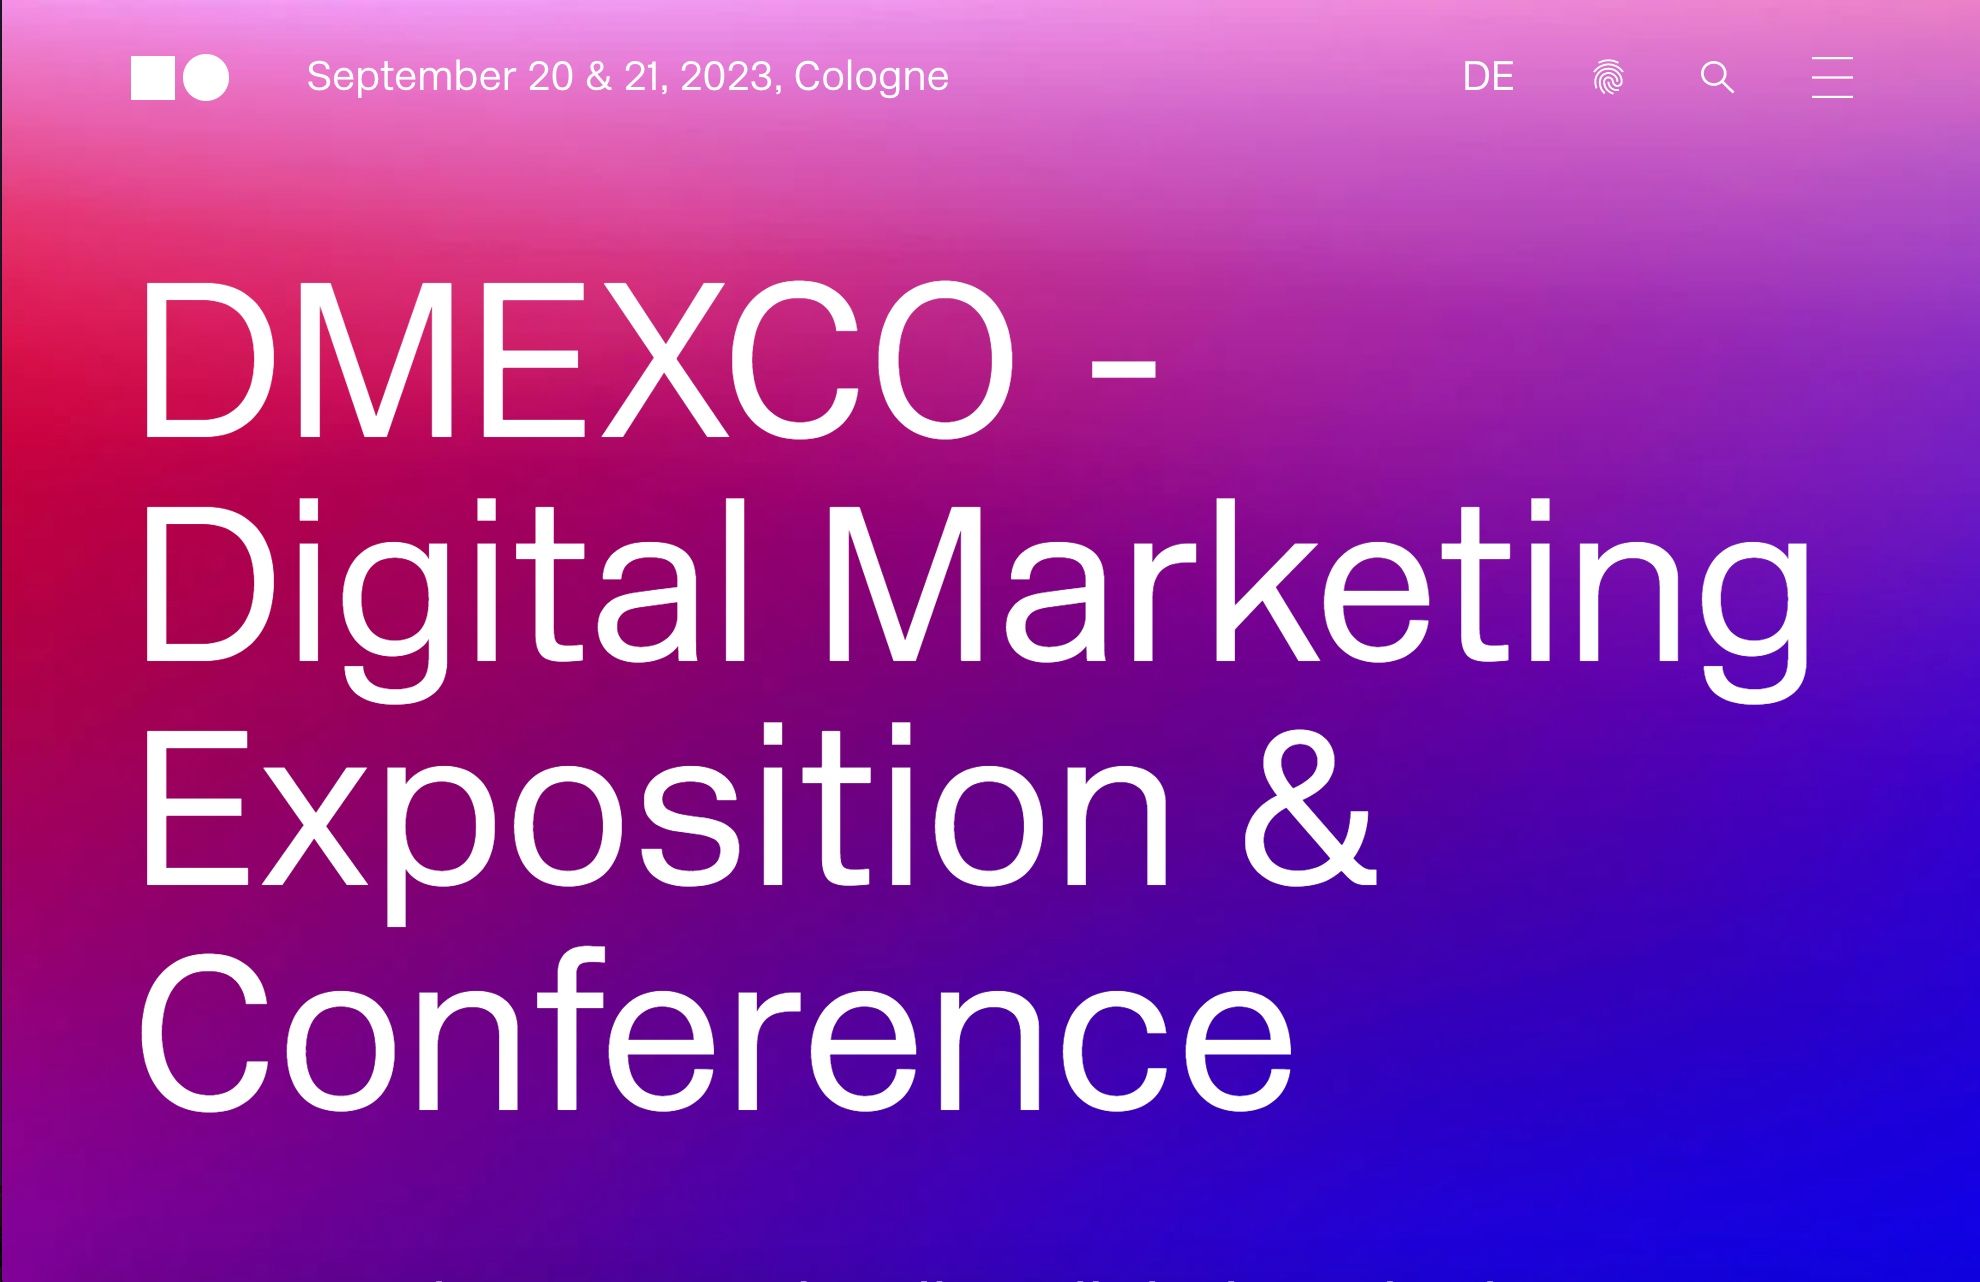 Marketing event worth visiting in 2023: DMEXCO